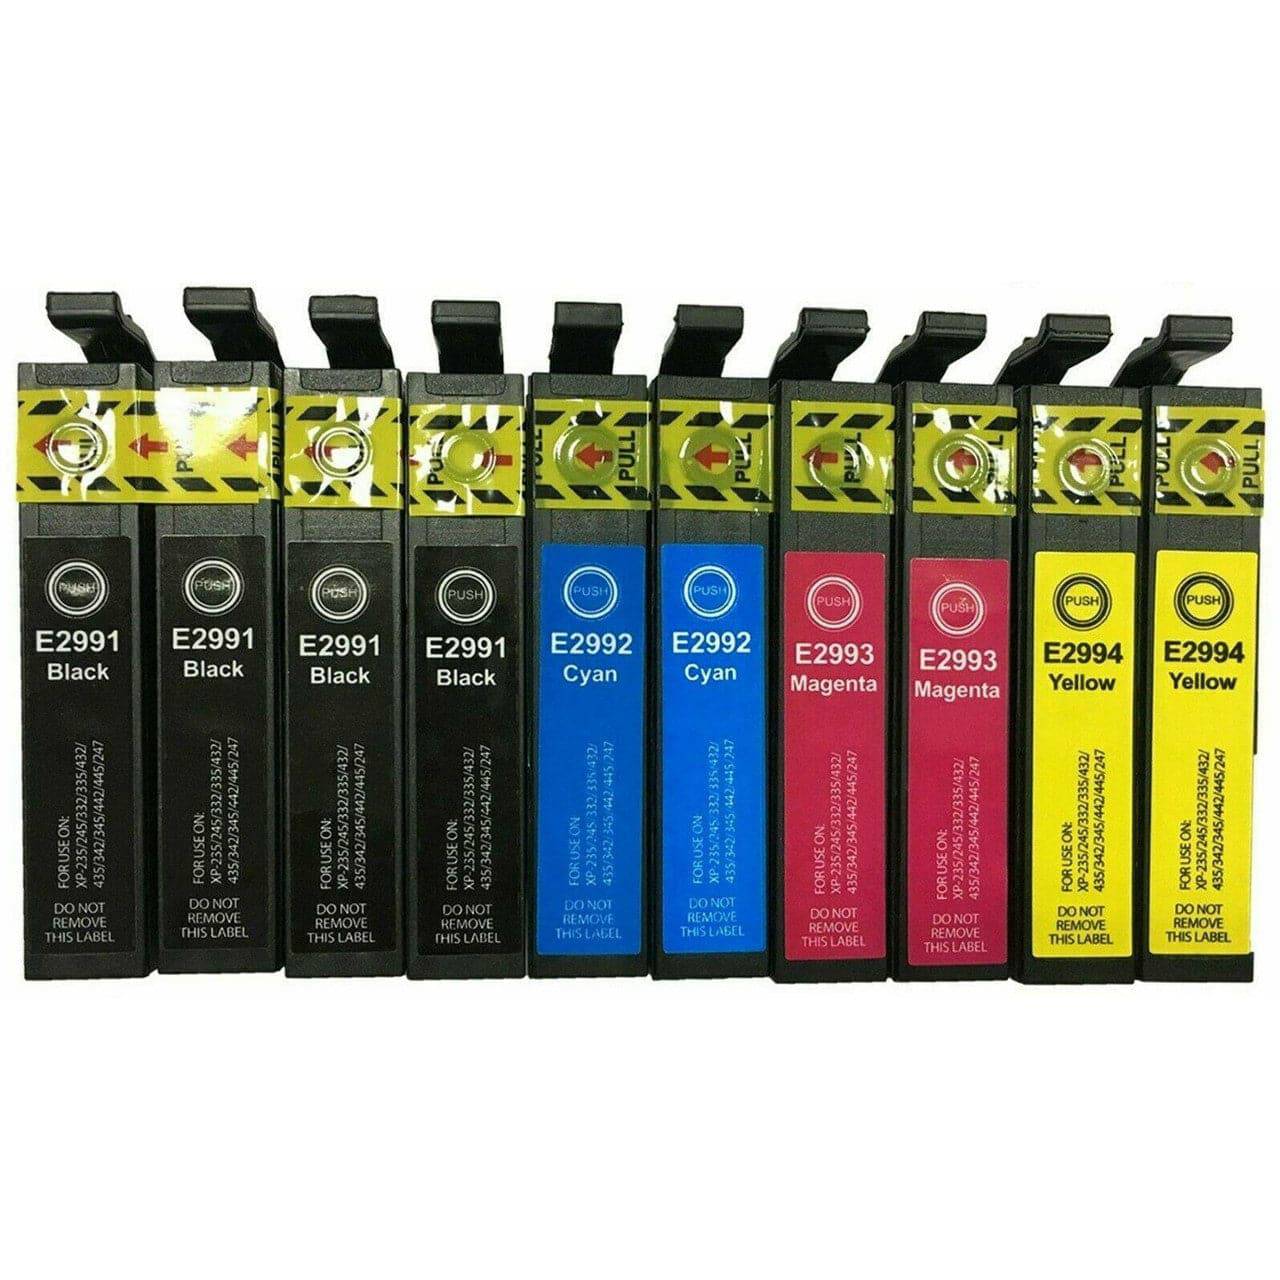 Compatible 10 Pack Epson 29XL Compatible High Yield Ink Cartridges [4BK, 2C, 2M, 2Y]